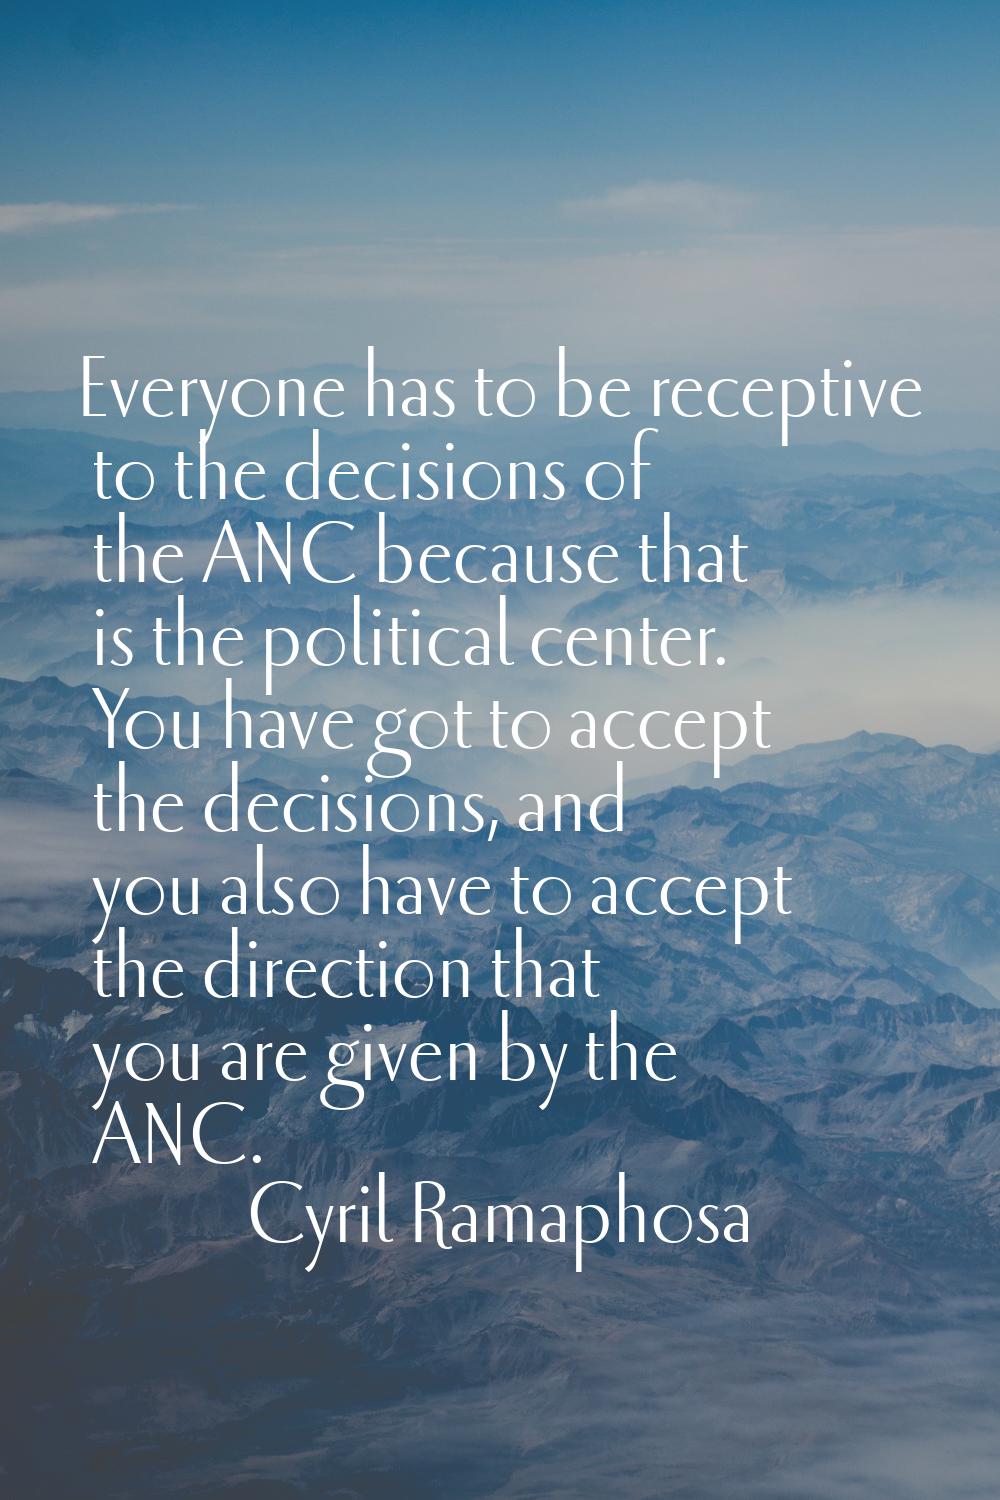 Everyone has to be receptive to the decisions of the ANC because that is the political center. You 